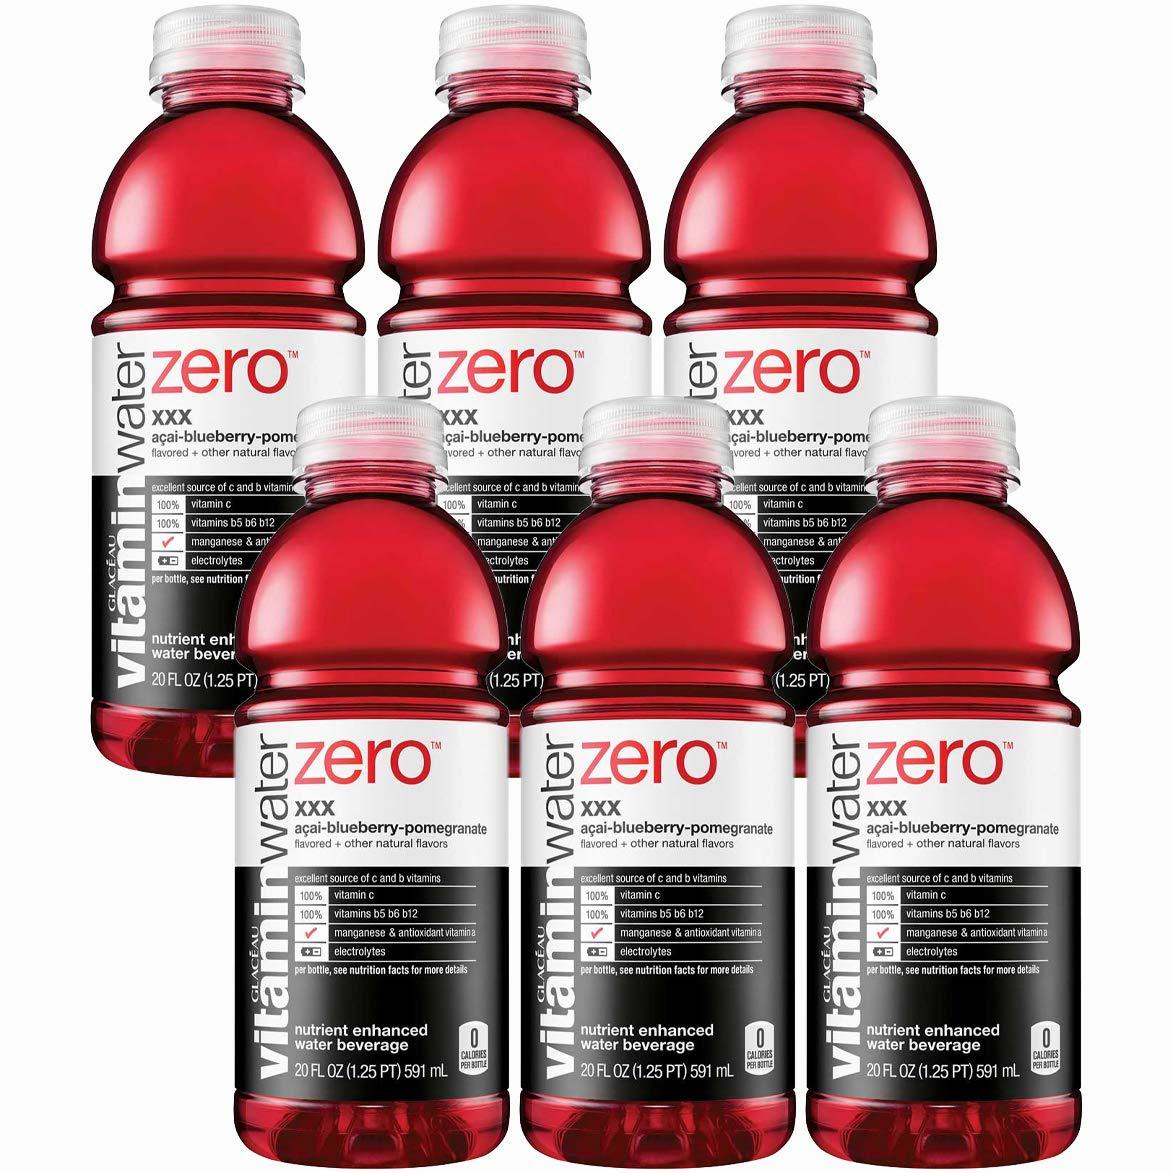 A pack of six bottles of Vitamin Water Zero in the flavor acai-blueberry-pomegranate.